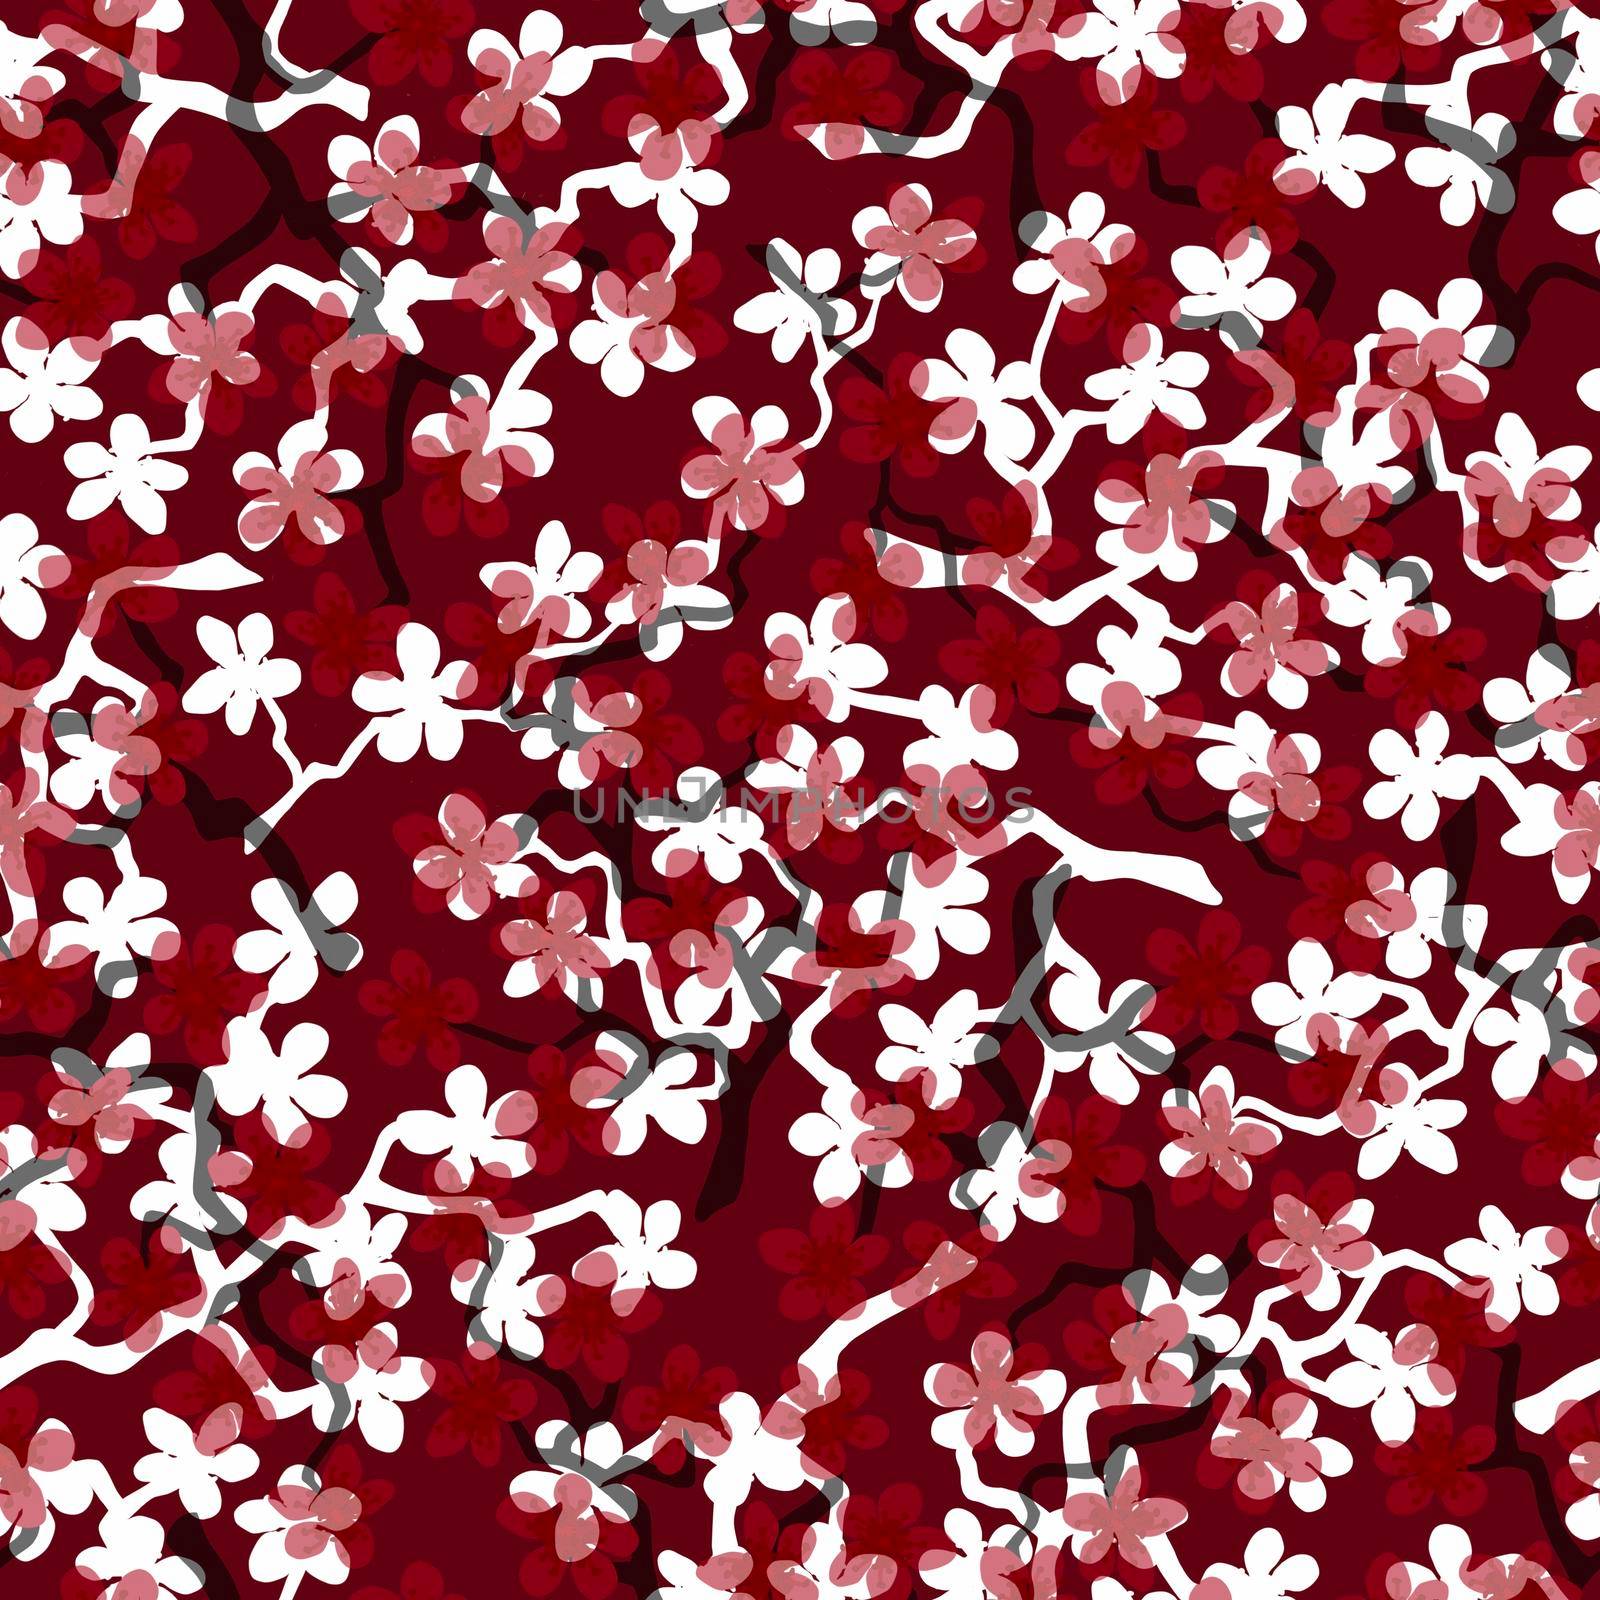 Seamless pattern with blossoming Japanese cherry sakura branches for fabric,packaging,wallpaper,textile decor,design, invitations,gift wrap,manufacturing.Red and white flowers on ruby background. by Angelsmoon